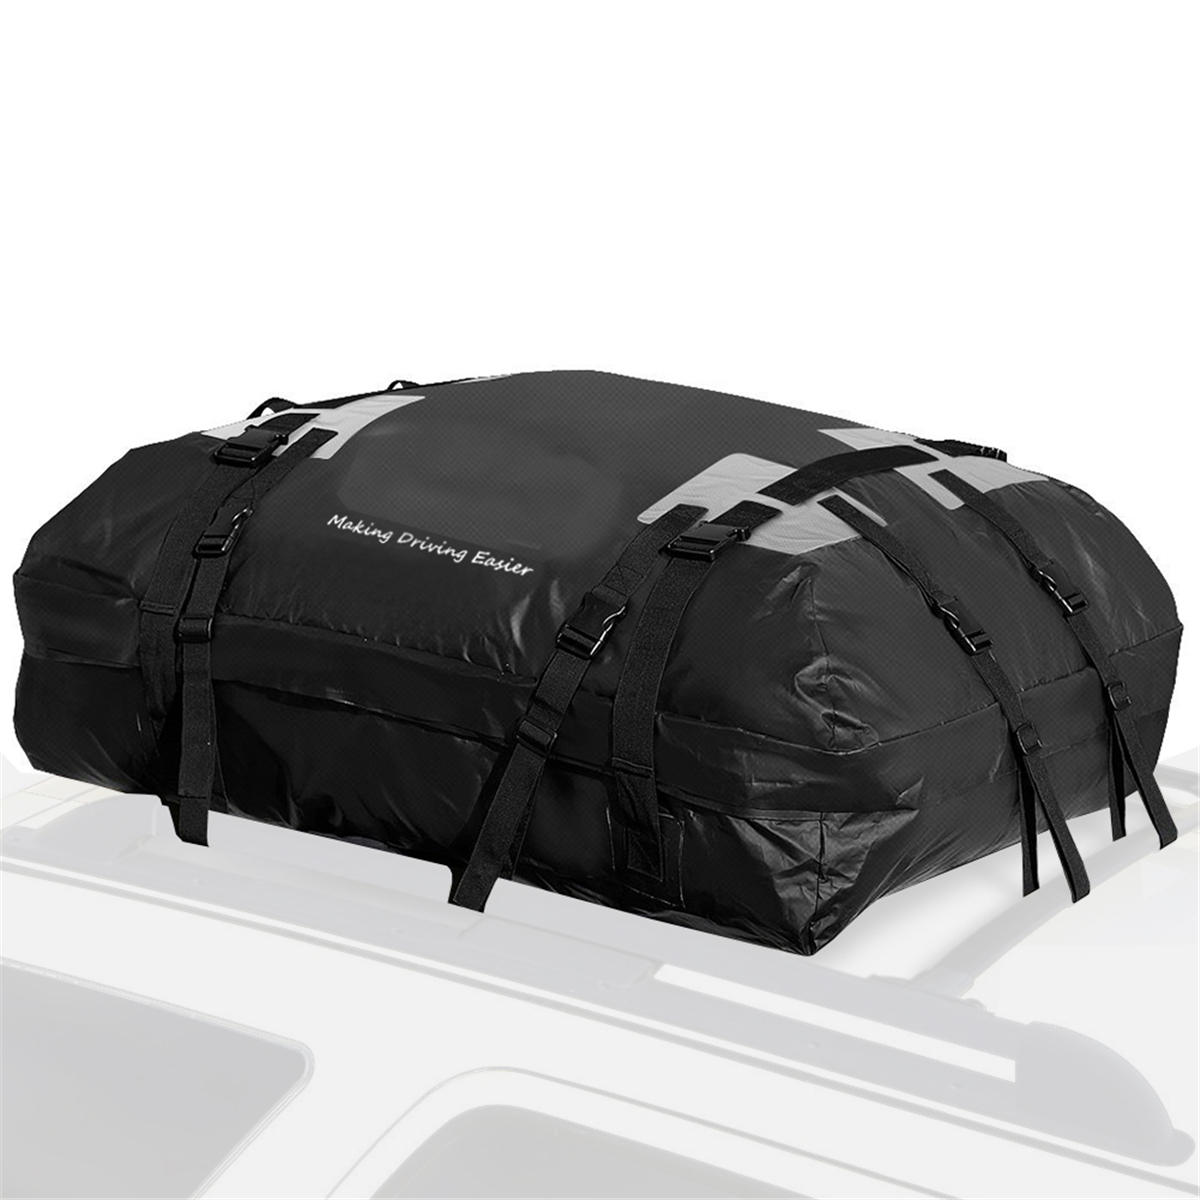 Outdoor Travel Car Roof Rack Bag Pack Waterproof Cargo Carrier Luggage Storage Pouch